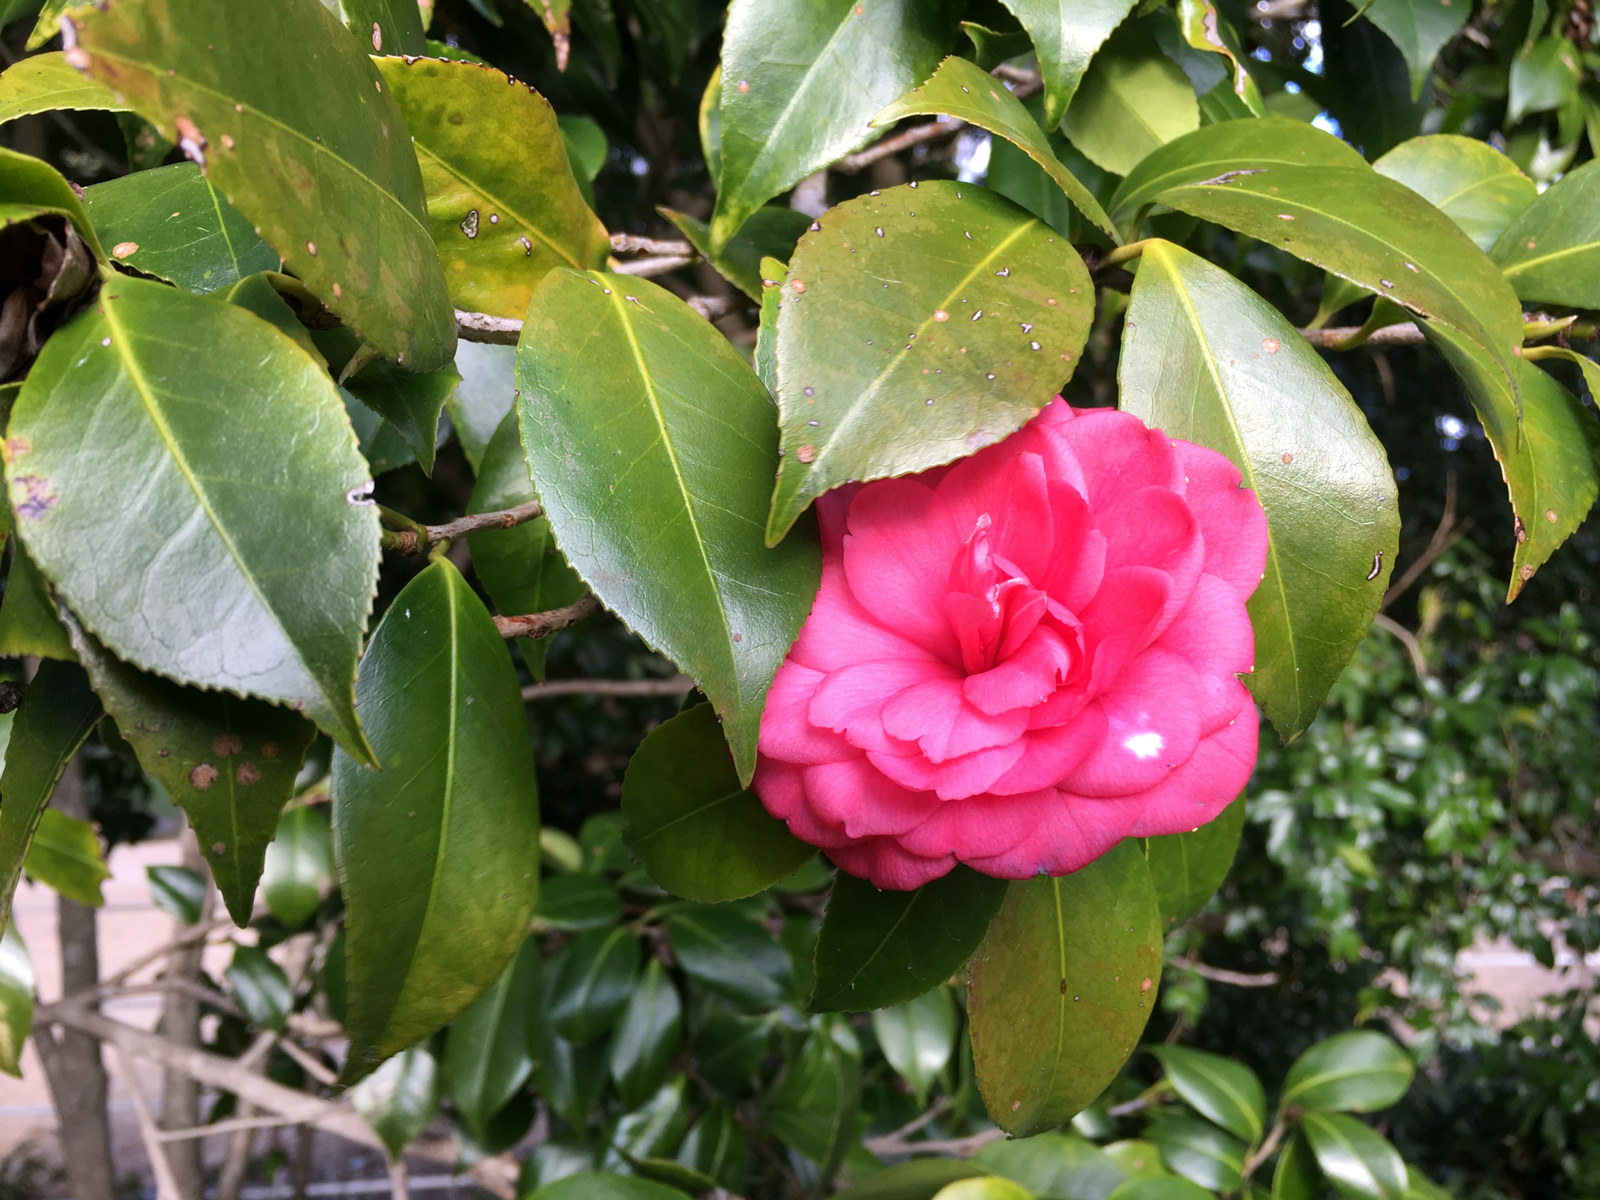 Camellia japonica 'C.M Hovey'. at Vaucluse house is a semi-formal double red/pink cultivar